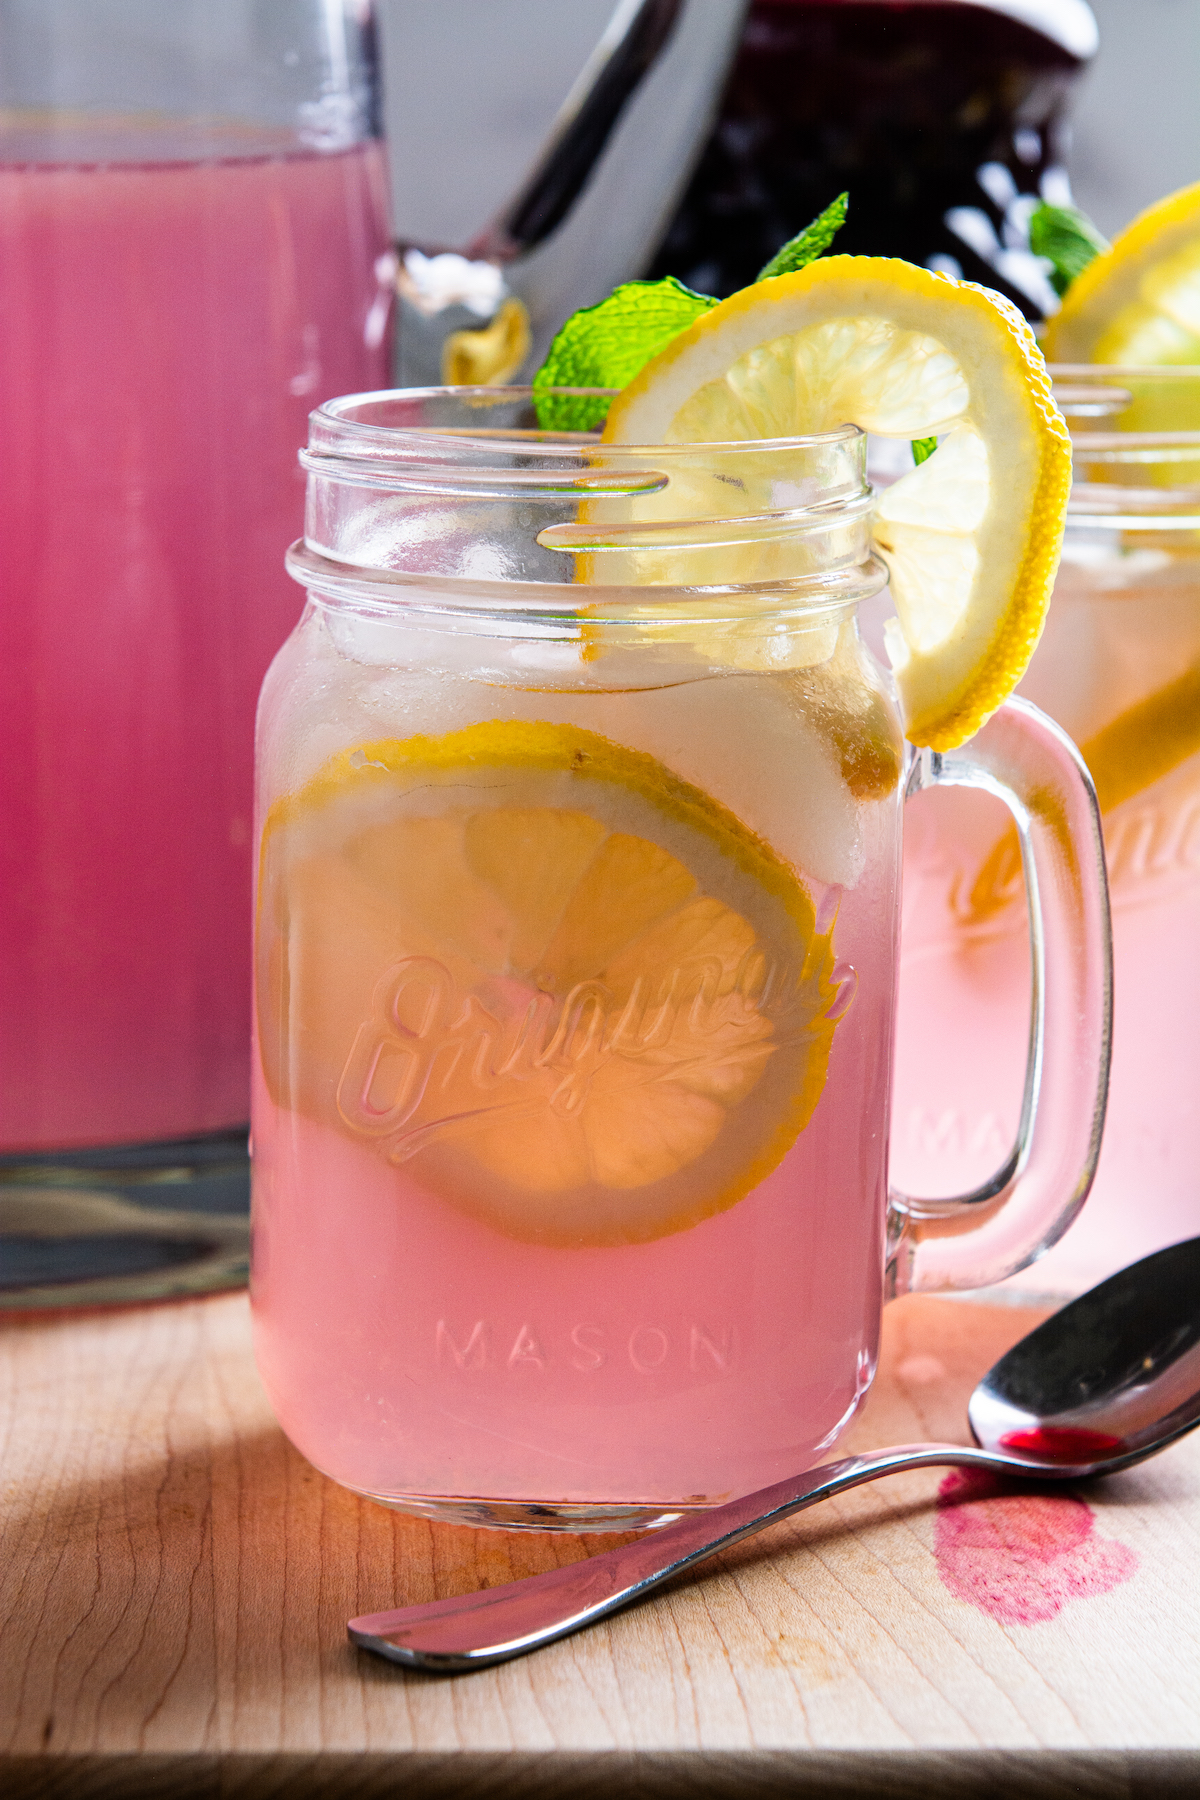 A glass of pink lemonade with lemon slices with a pitcher of pink lemonade in the background.